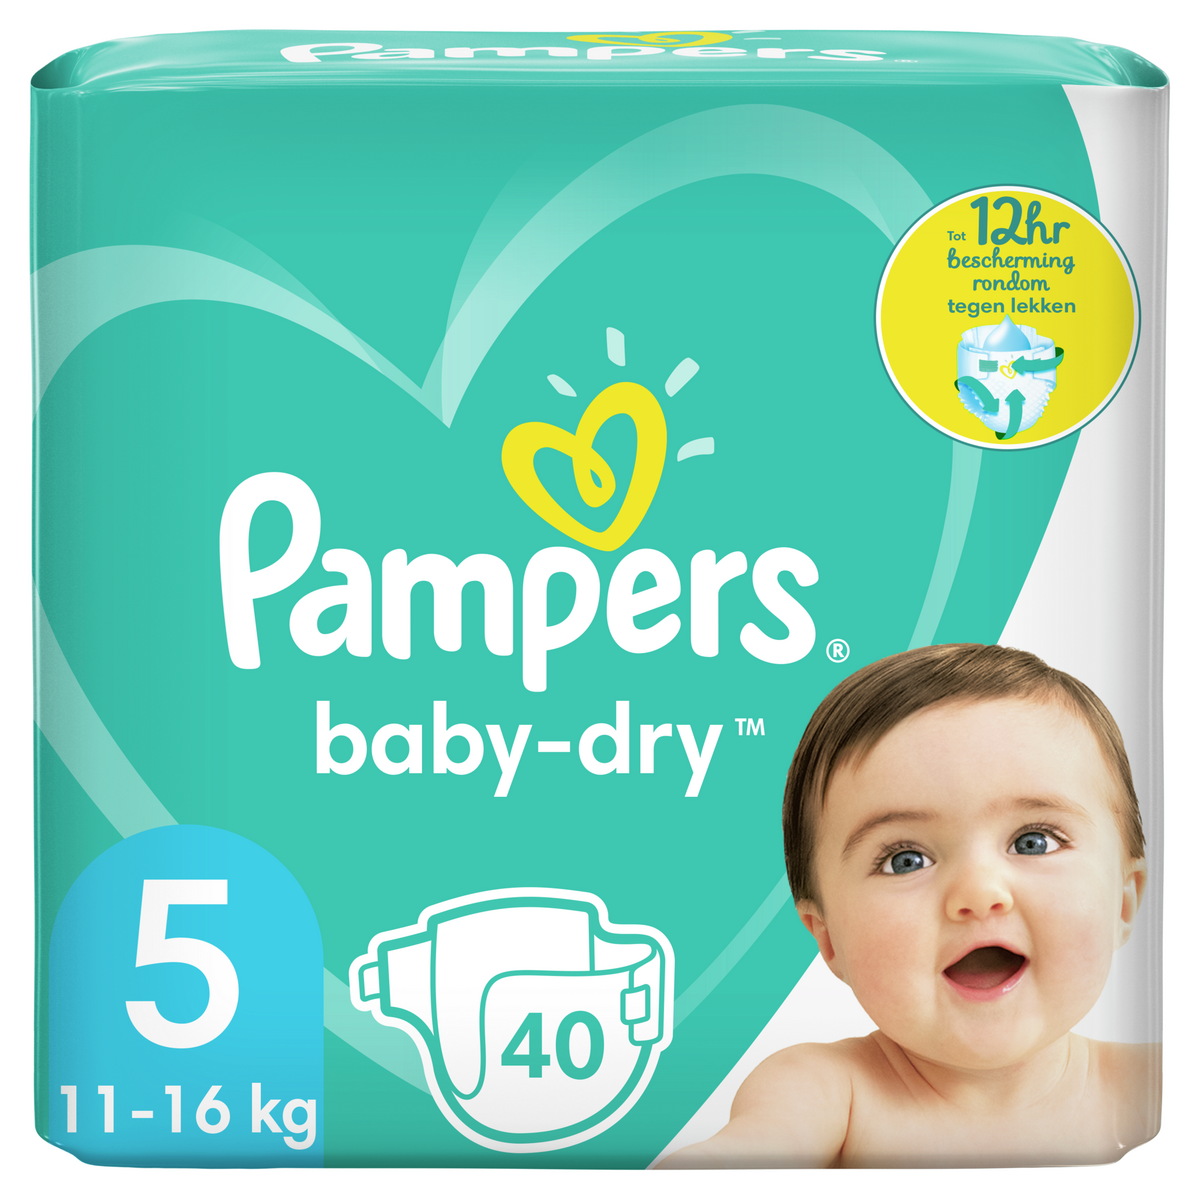 Mega Pack 80 couches PAMPERS Baby Dry Pants Taille 5 (12 à 17KG